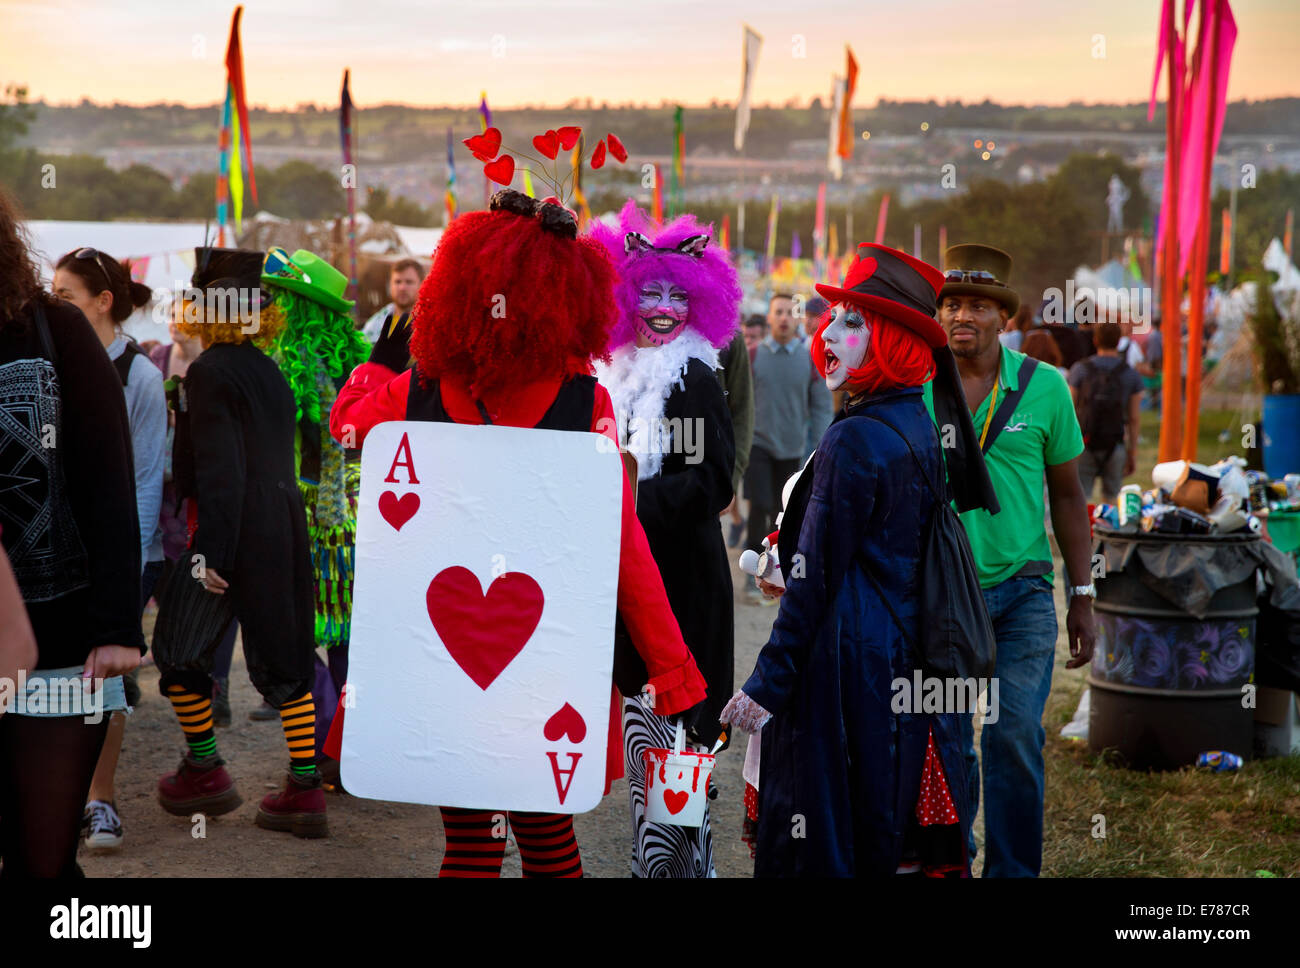 Dressed up as Alice in wonderland, festival goers walking through the greenfields of Glastonbury Festival 2014 Stock Photo